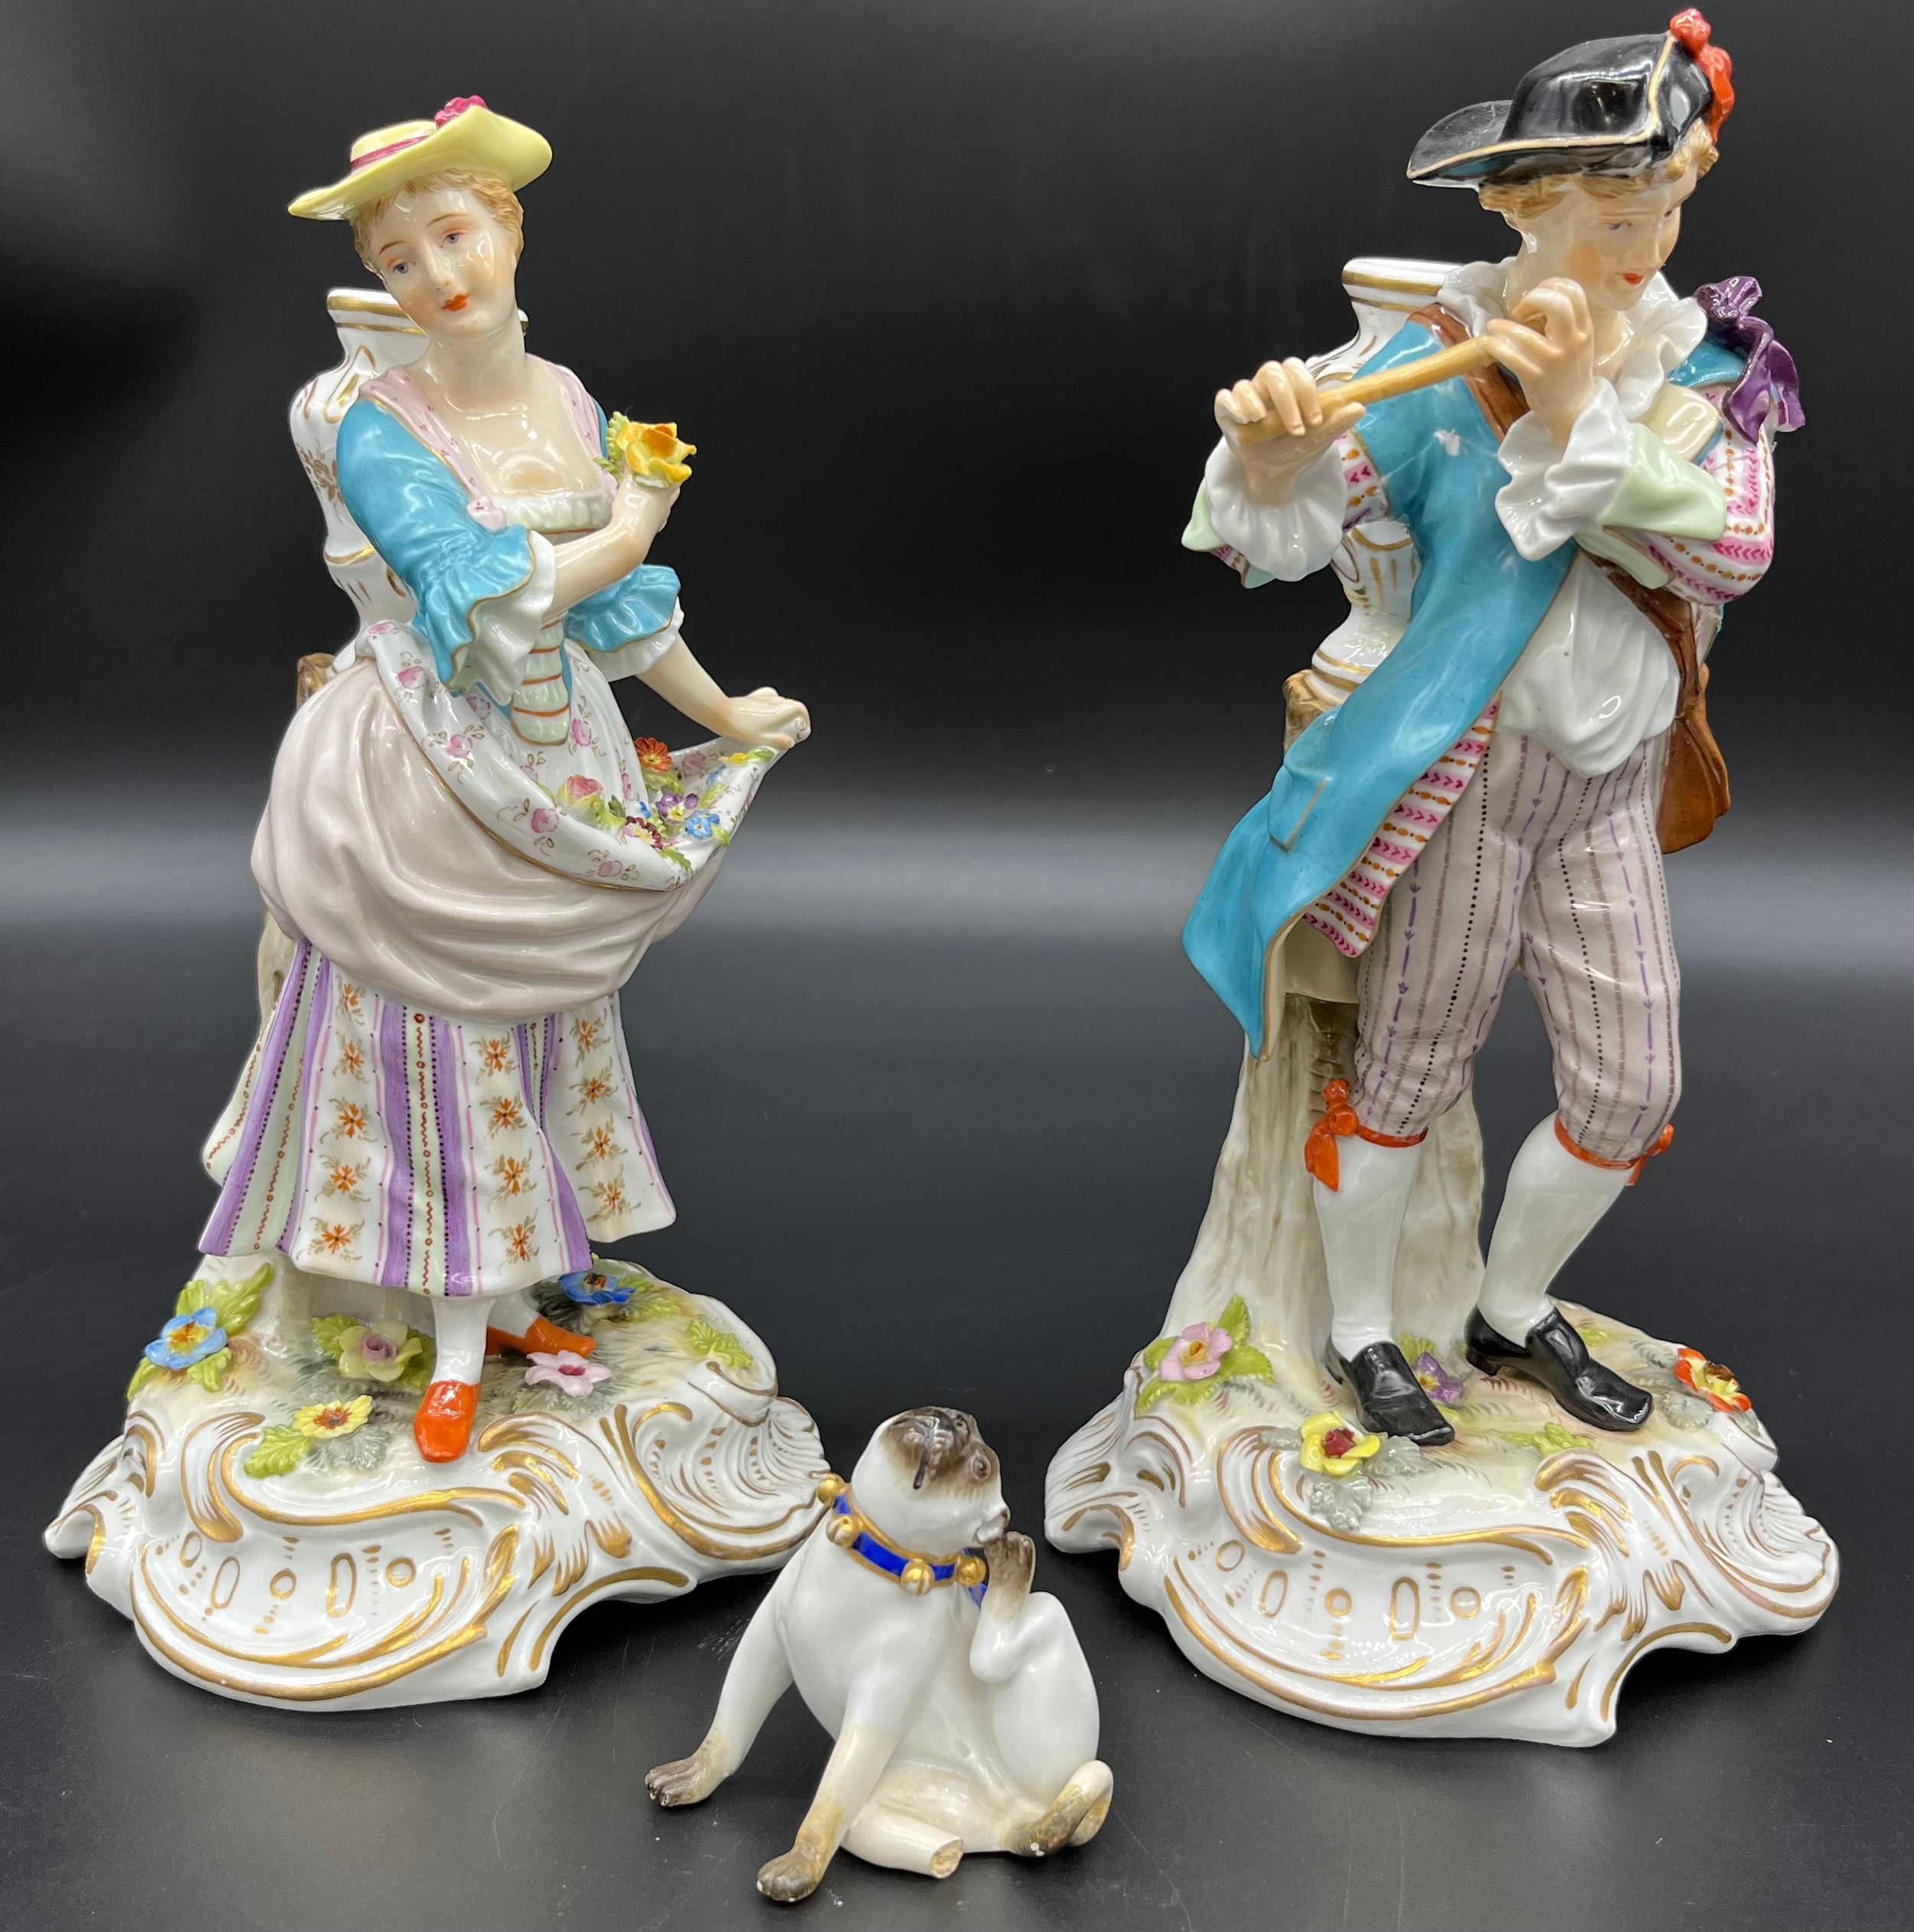 A Large pair of antique Meissen style figures, Together with a small Meissen pug dog. [As Found][